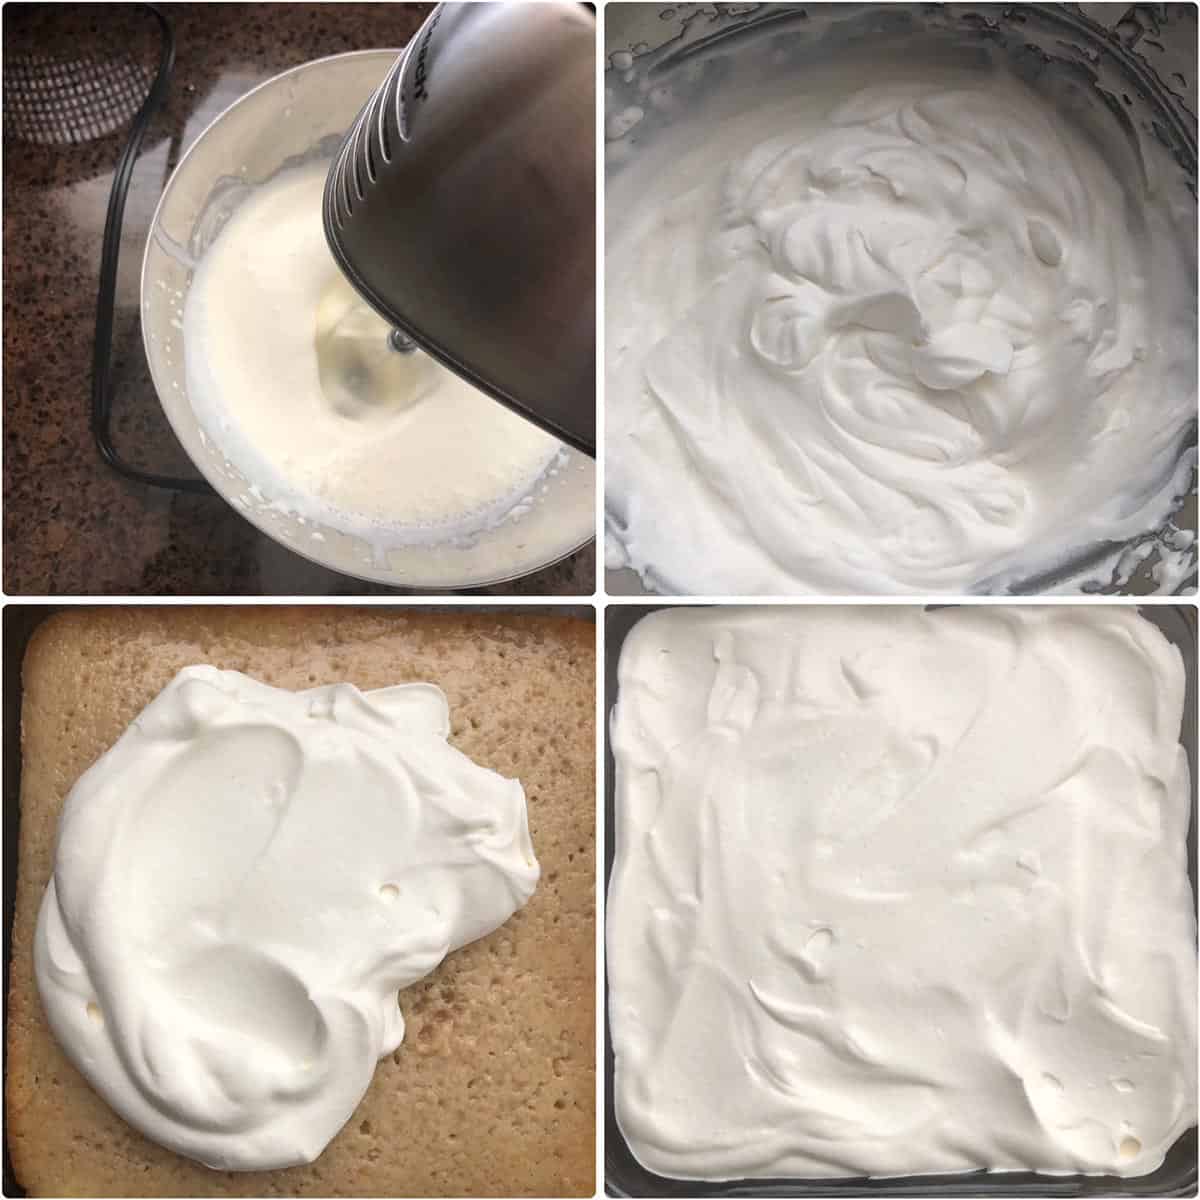 Non-dairy whipping cream whipped until stiff peaks form and then spread on the cake